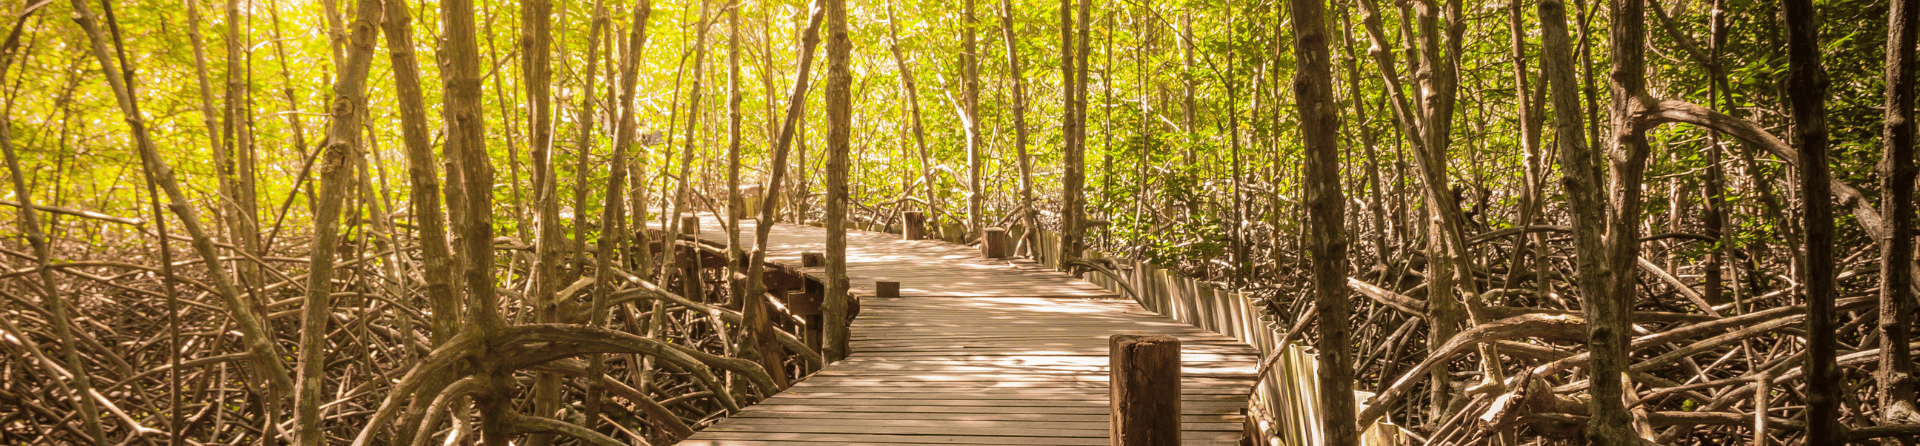 What can I see along the Mangrove Boardwalk?